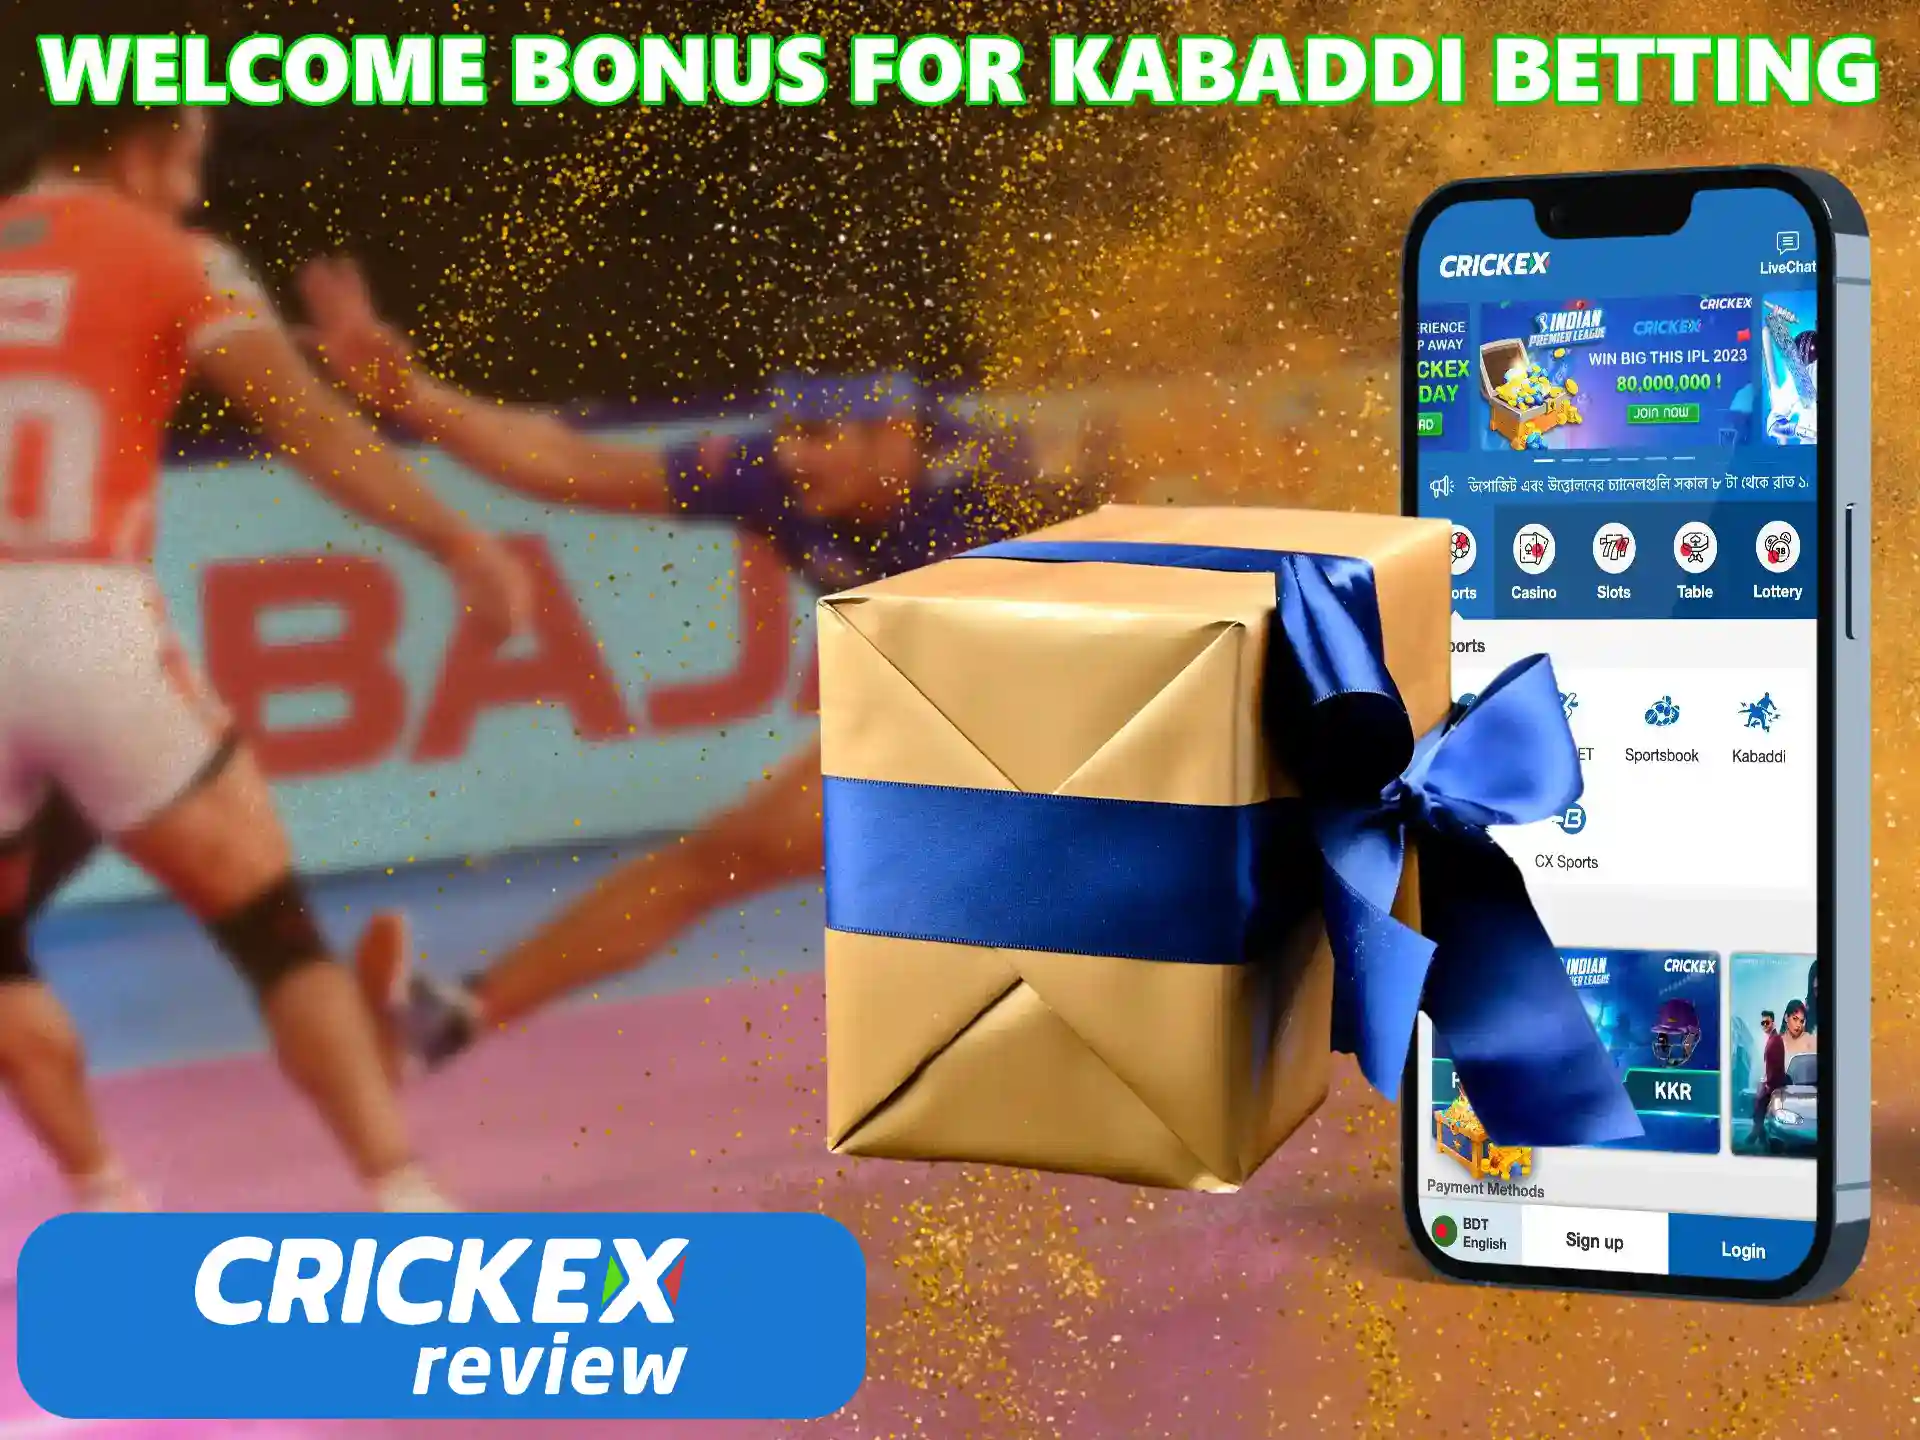 Players from Bangladesh can rest assured that they are getting the best betting conditions while receiving generous compliments from Crickex.